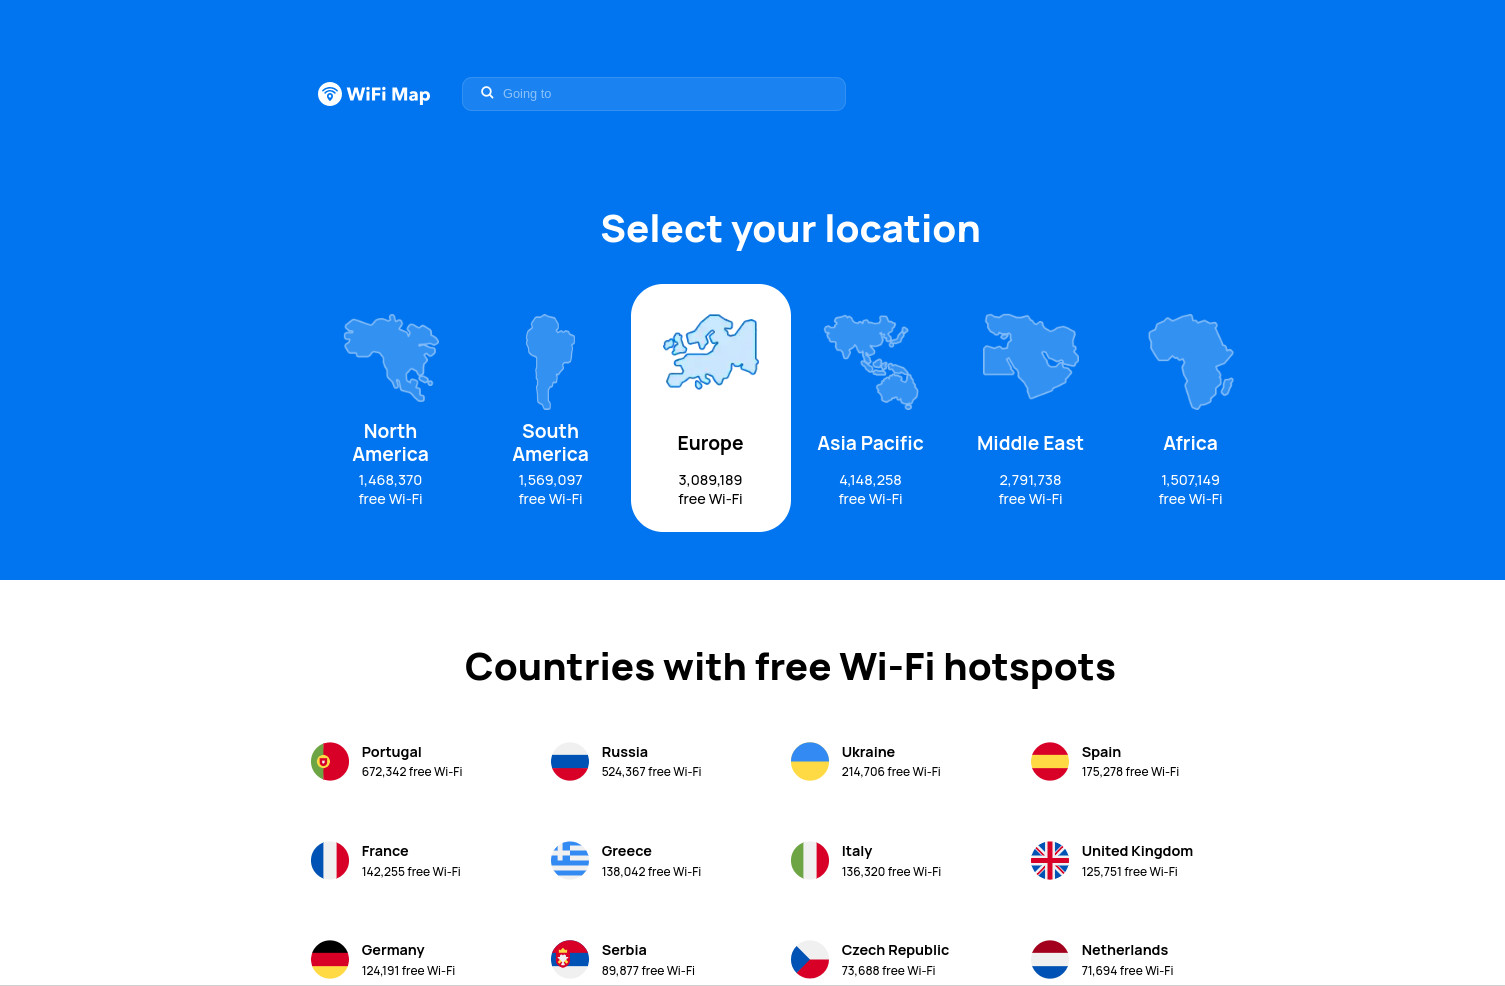 WiFi Map is a decentralized physical infrastructure network (DePIN) project that connects the unconnected by providing users with a platform to discover, share, and access WiFi hotspots worldwide. With over 170 million users, WiFi Map is on a mission to bridge the global digital divide by making reliable internet access more accessible and affordable.